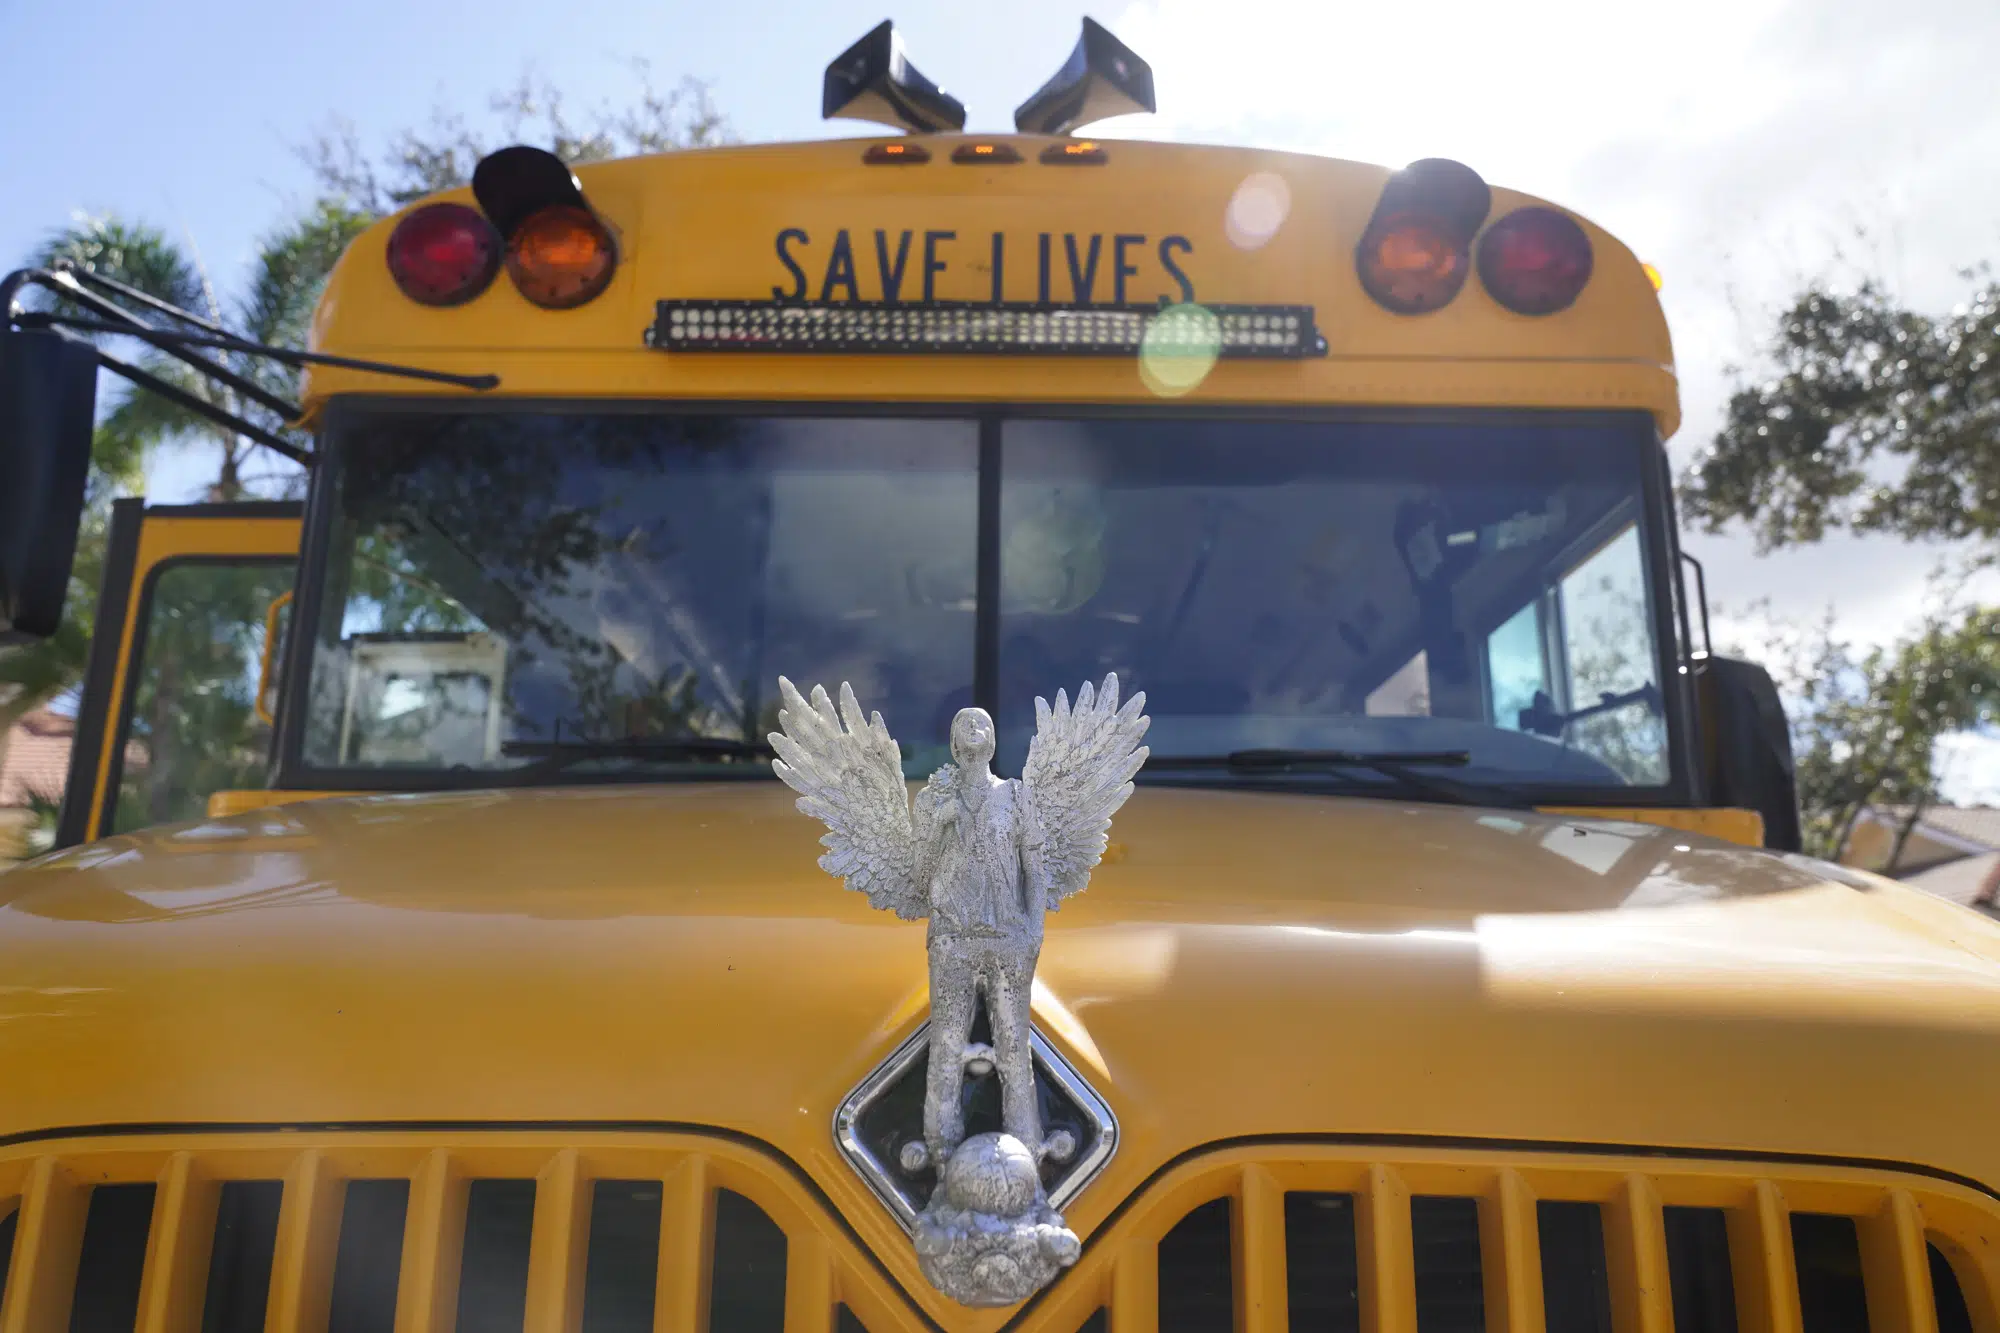 A hood ornament sculptured by Manuel Oliver of his son Joaquin with angel wings on a bus that the family takes around the country, is shown, Monday, Jan. 30, 2023, at the Oliver home in Coral Springs, Fla. The Oliver's 17-year-old son Joaquin was killed at Parkland's Marjory Stoneman Douglas High School shooting five years ago. Manuel and his wife Patricia Oliver started a foundation, Change the Ref, to challenge the political influence of the National Rifle Association and gun manufacturers. (AP Photo/Wilfredo Lee)